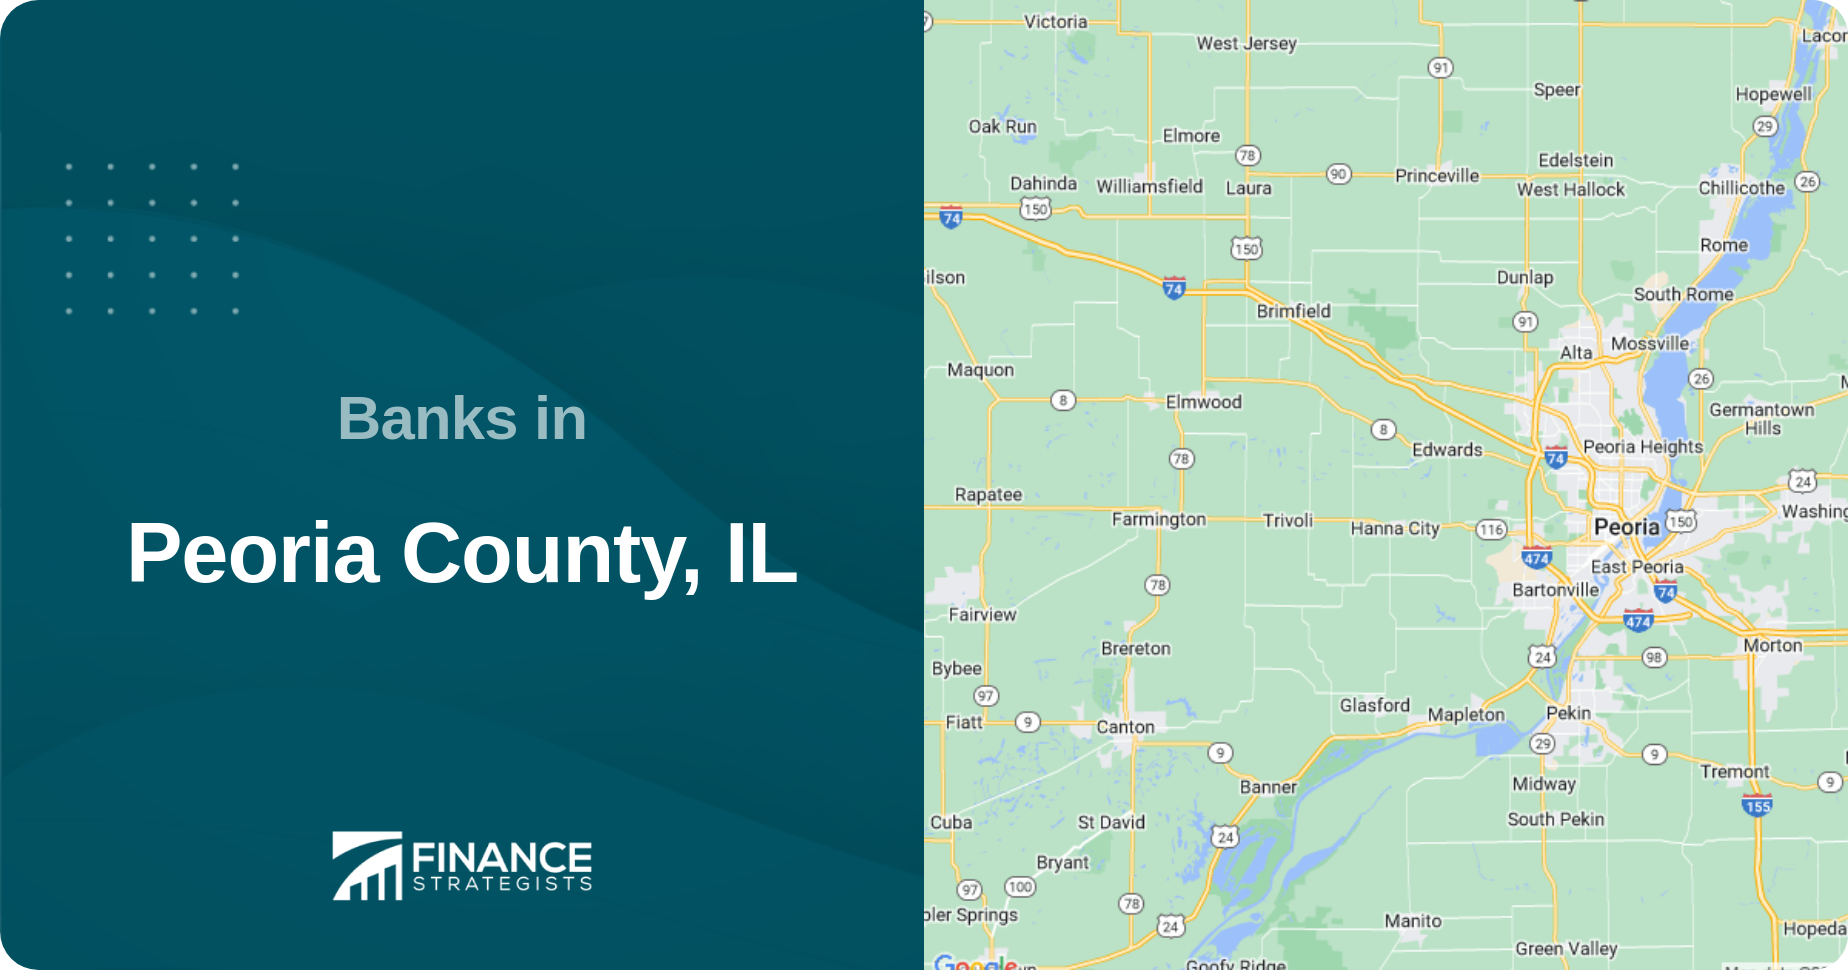 Banks in Peoria County, IL